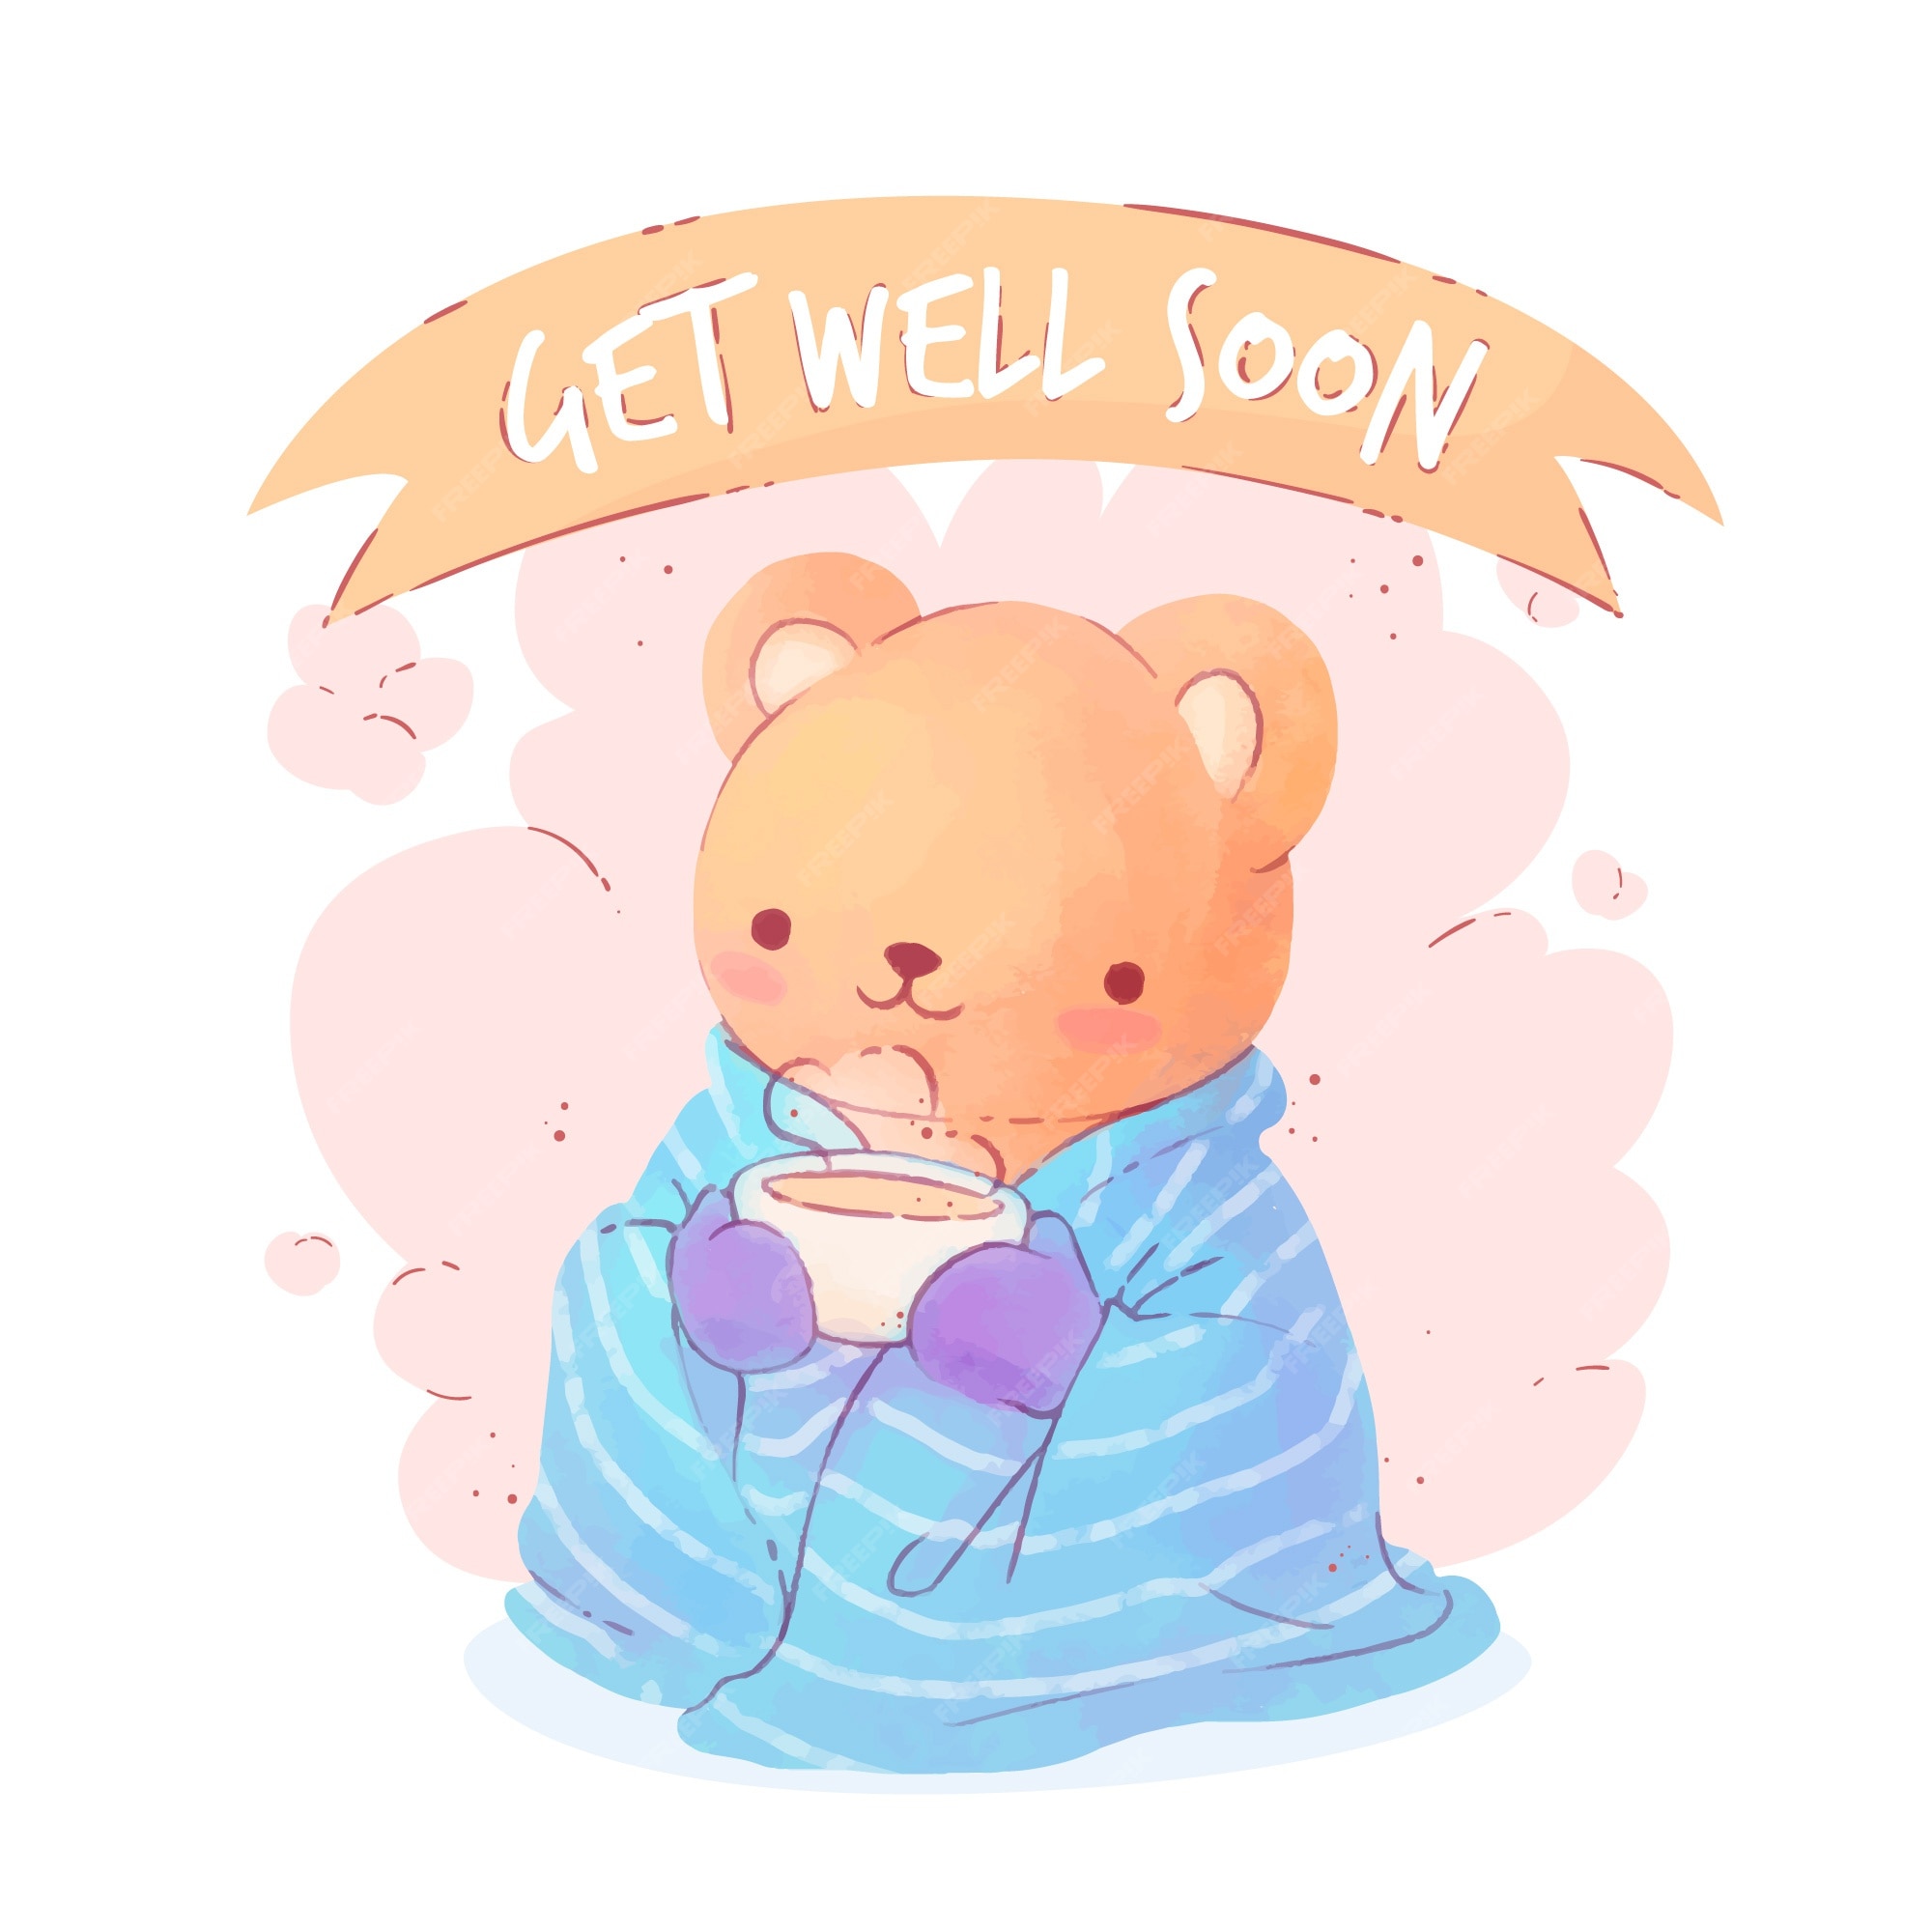 Free Vector  Get well soon with cute bear